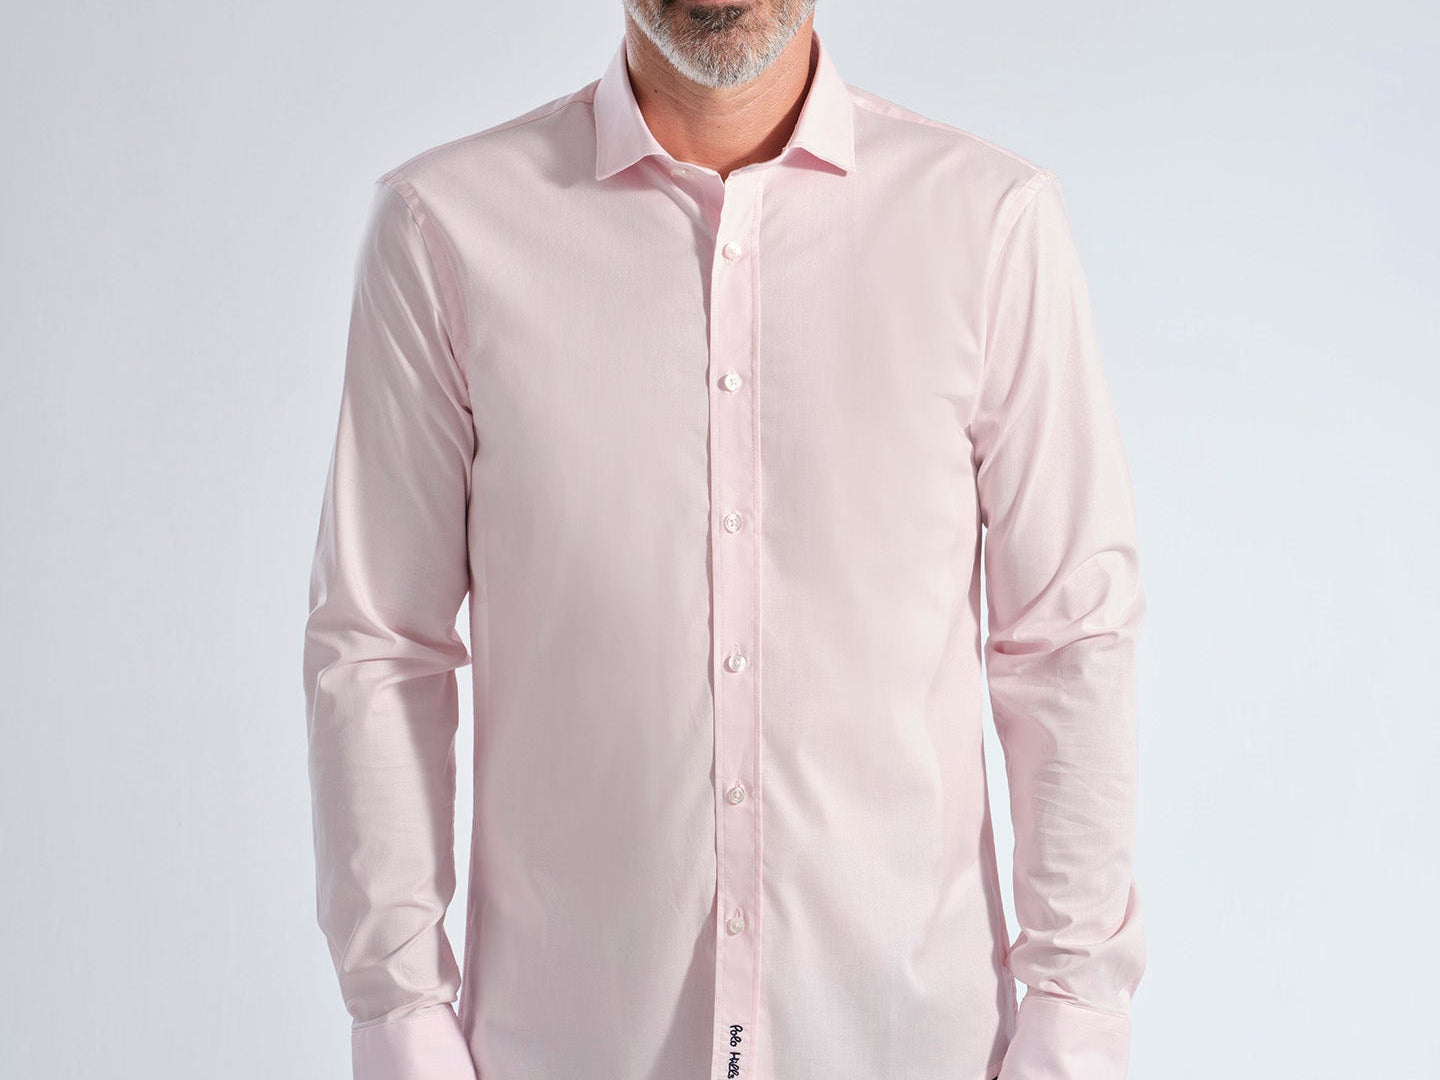 CAMISA PAP PINK - Polo Hills